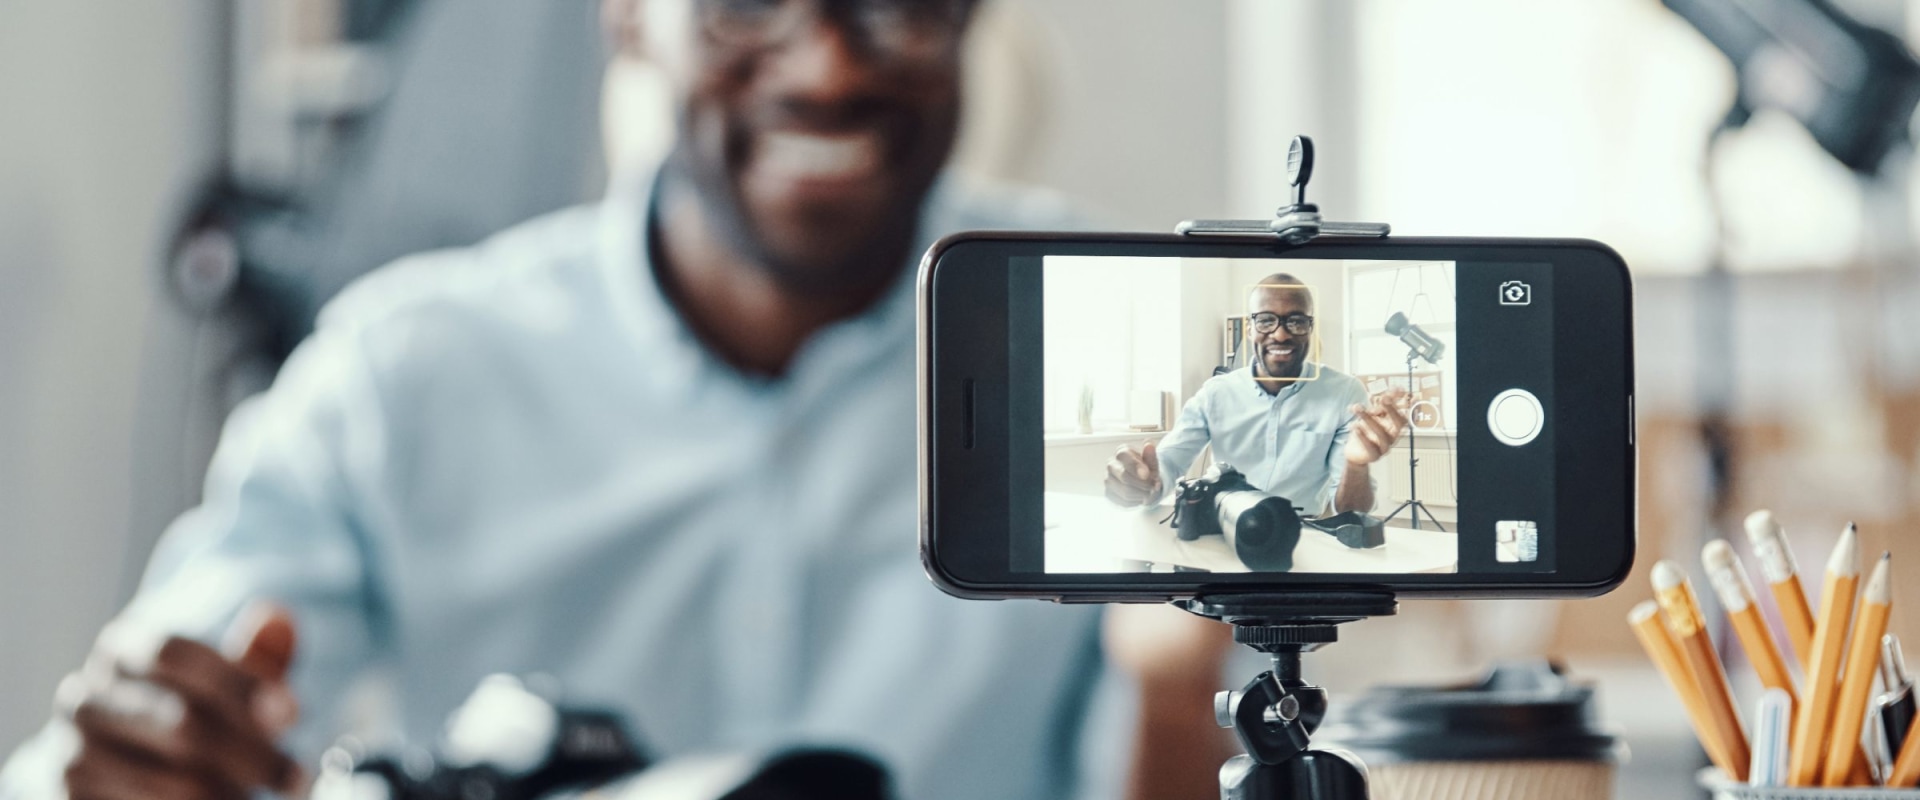 Building Relationships with Influencers to Promote Your Videos